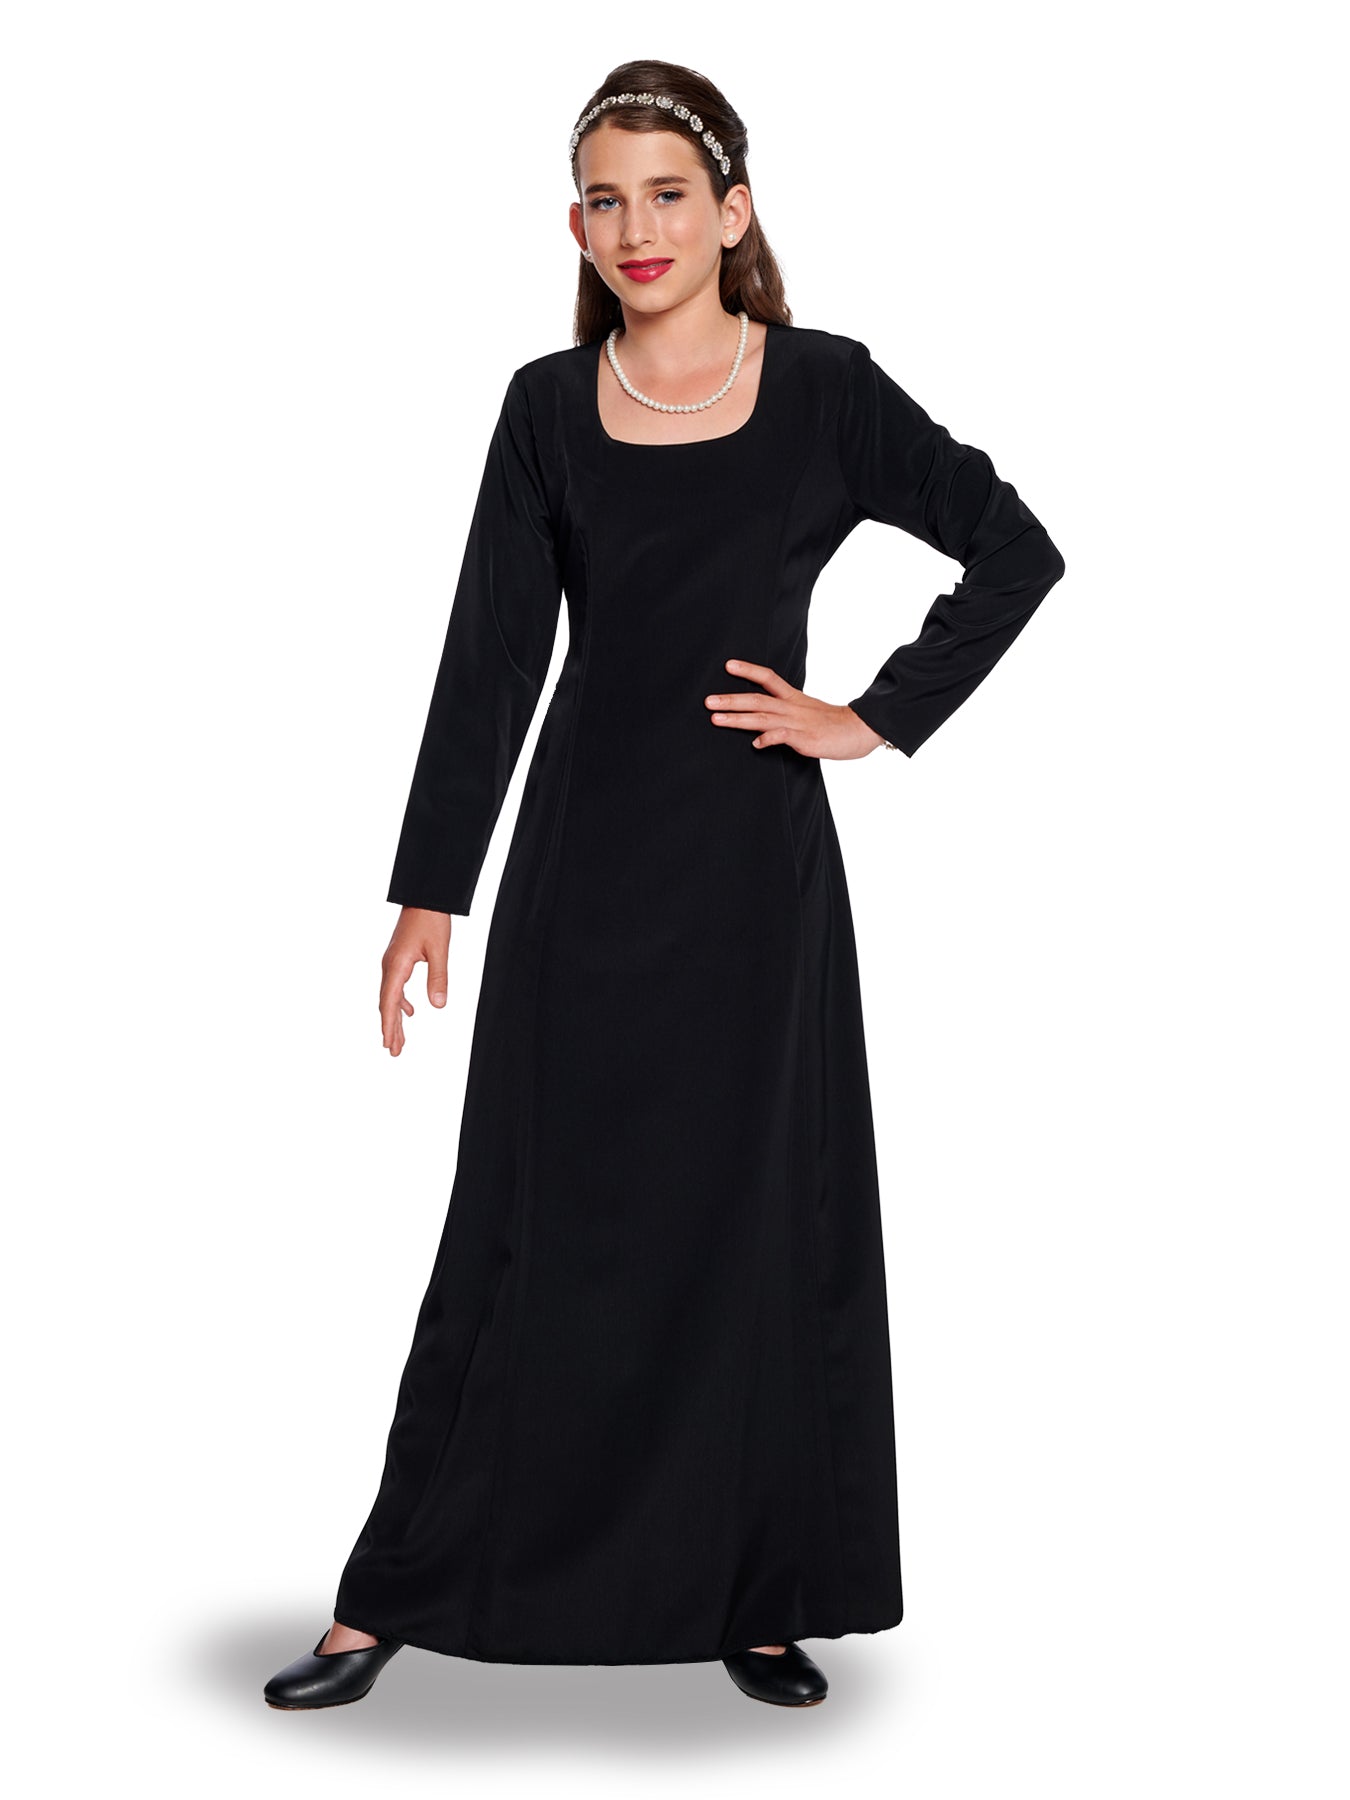 LILLIAN (Style #101Y) - Scoop Neck Long Sleeve Dress - Youth